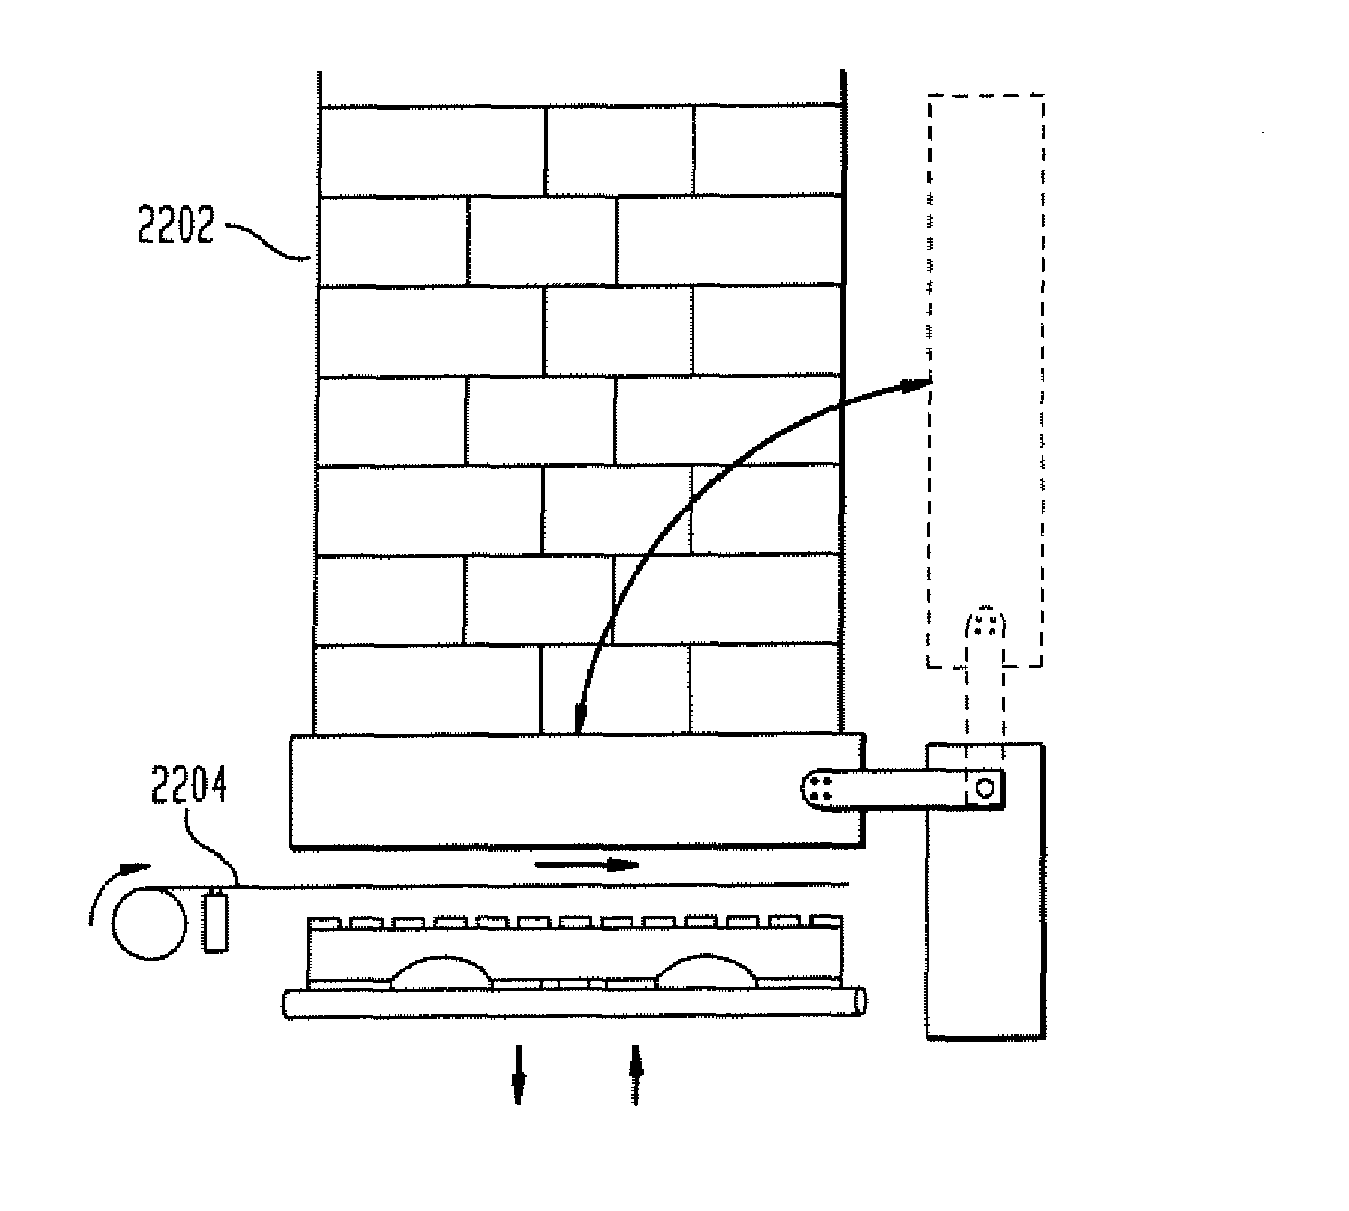 System and method for providing a regulated atmosphere for packaging perishable goods